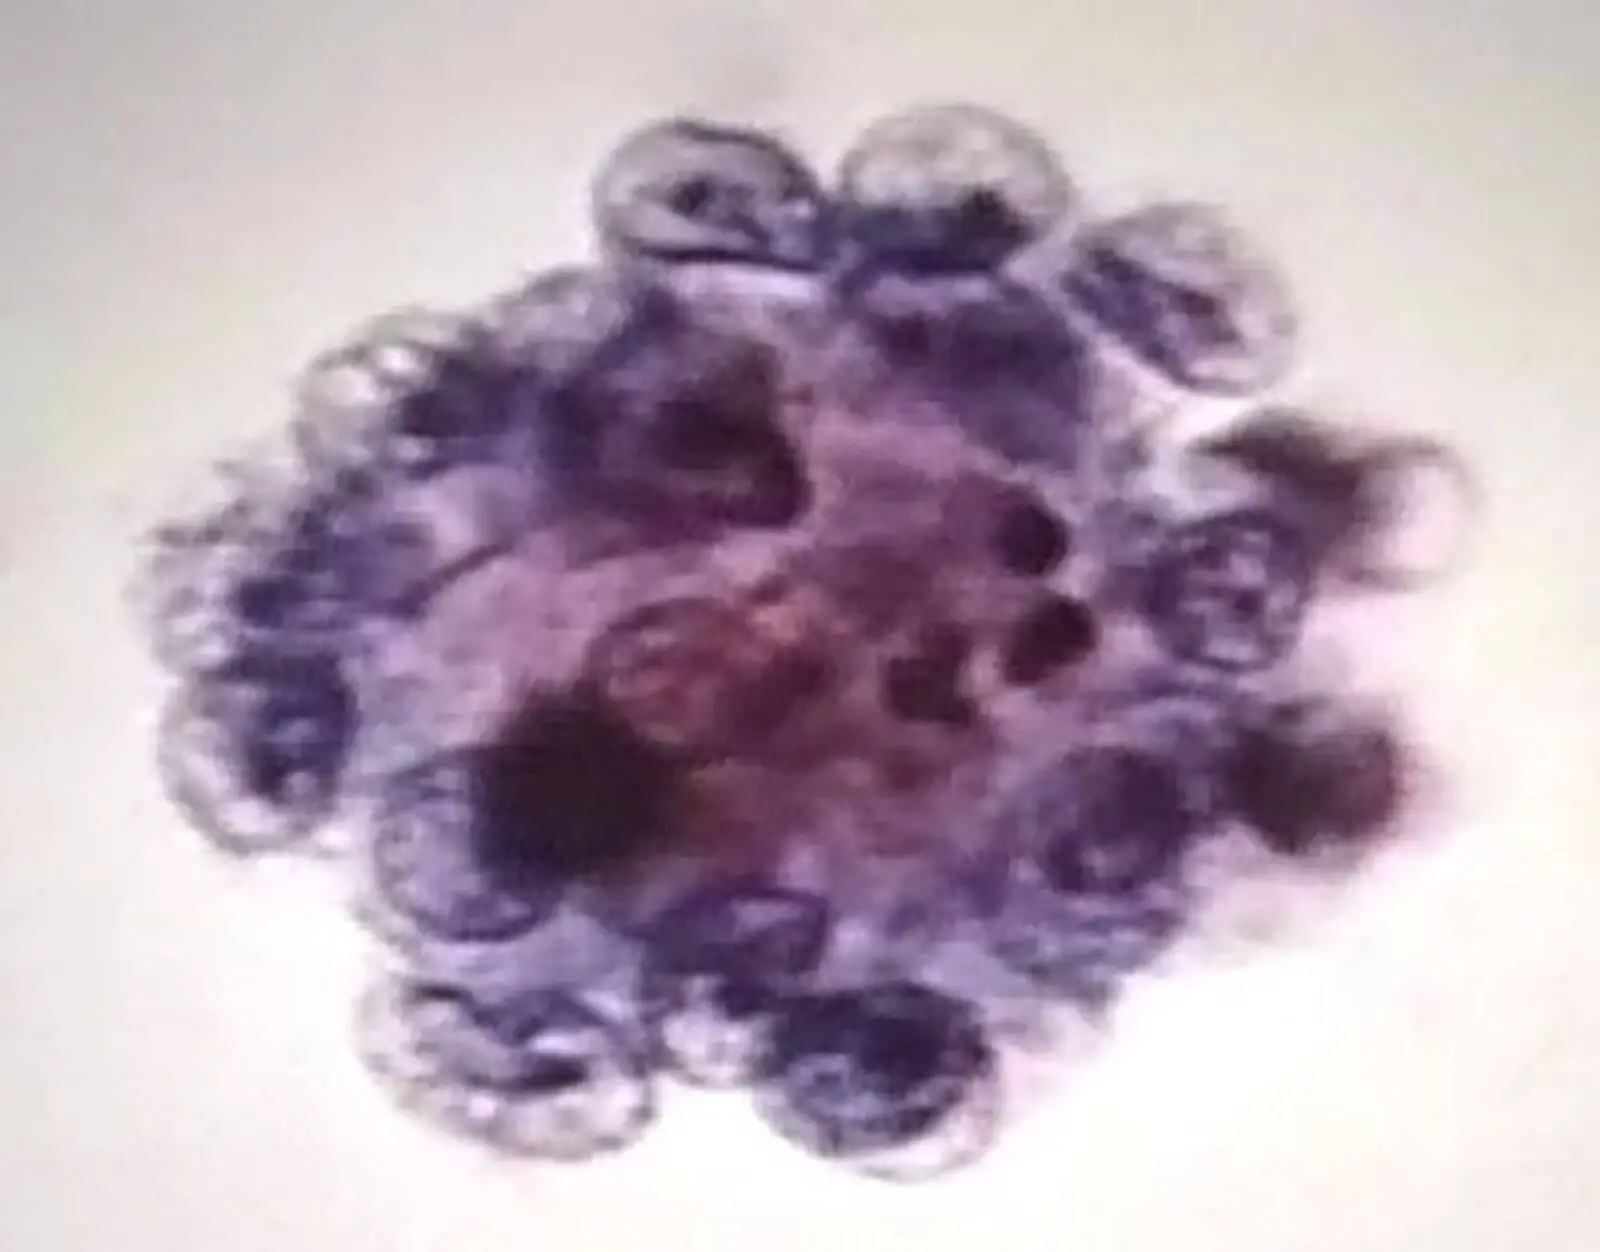 Prostate Cancer Cell In Urine